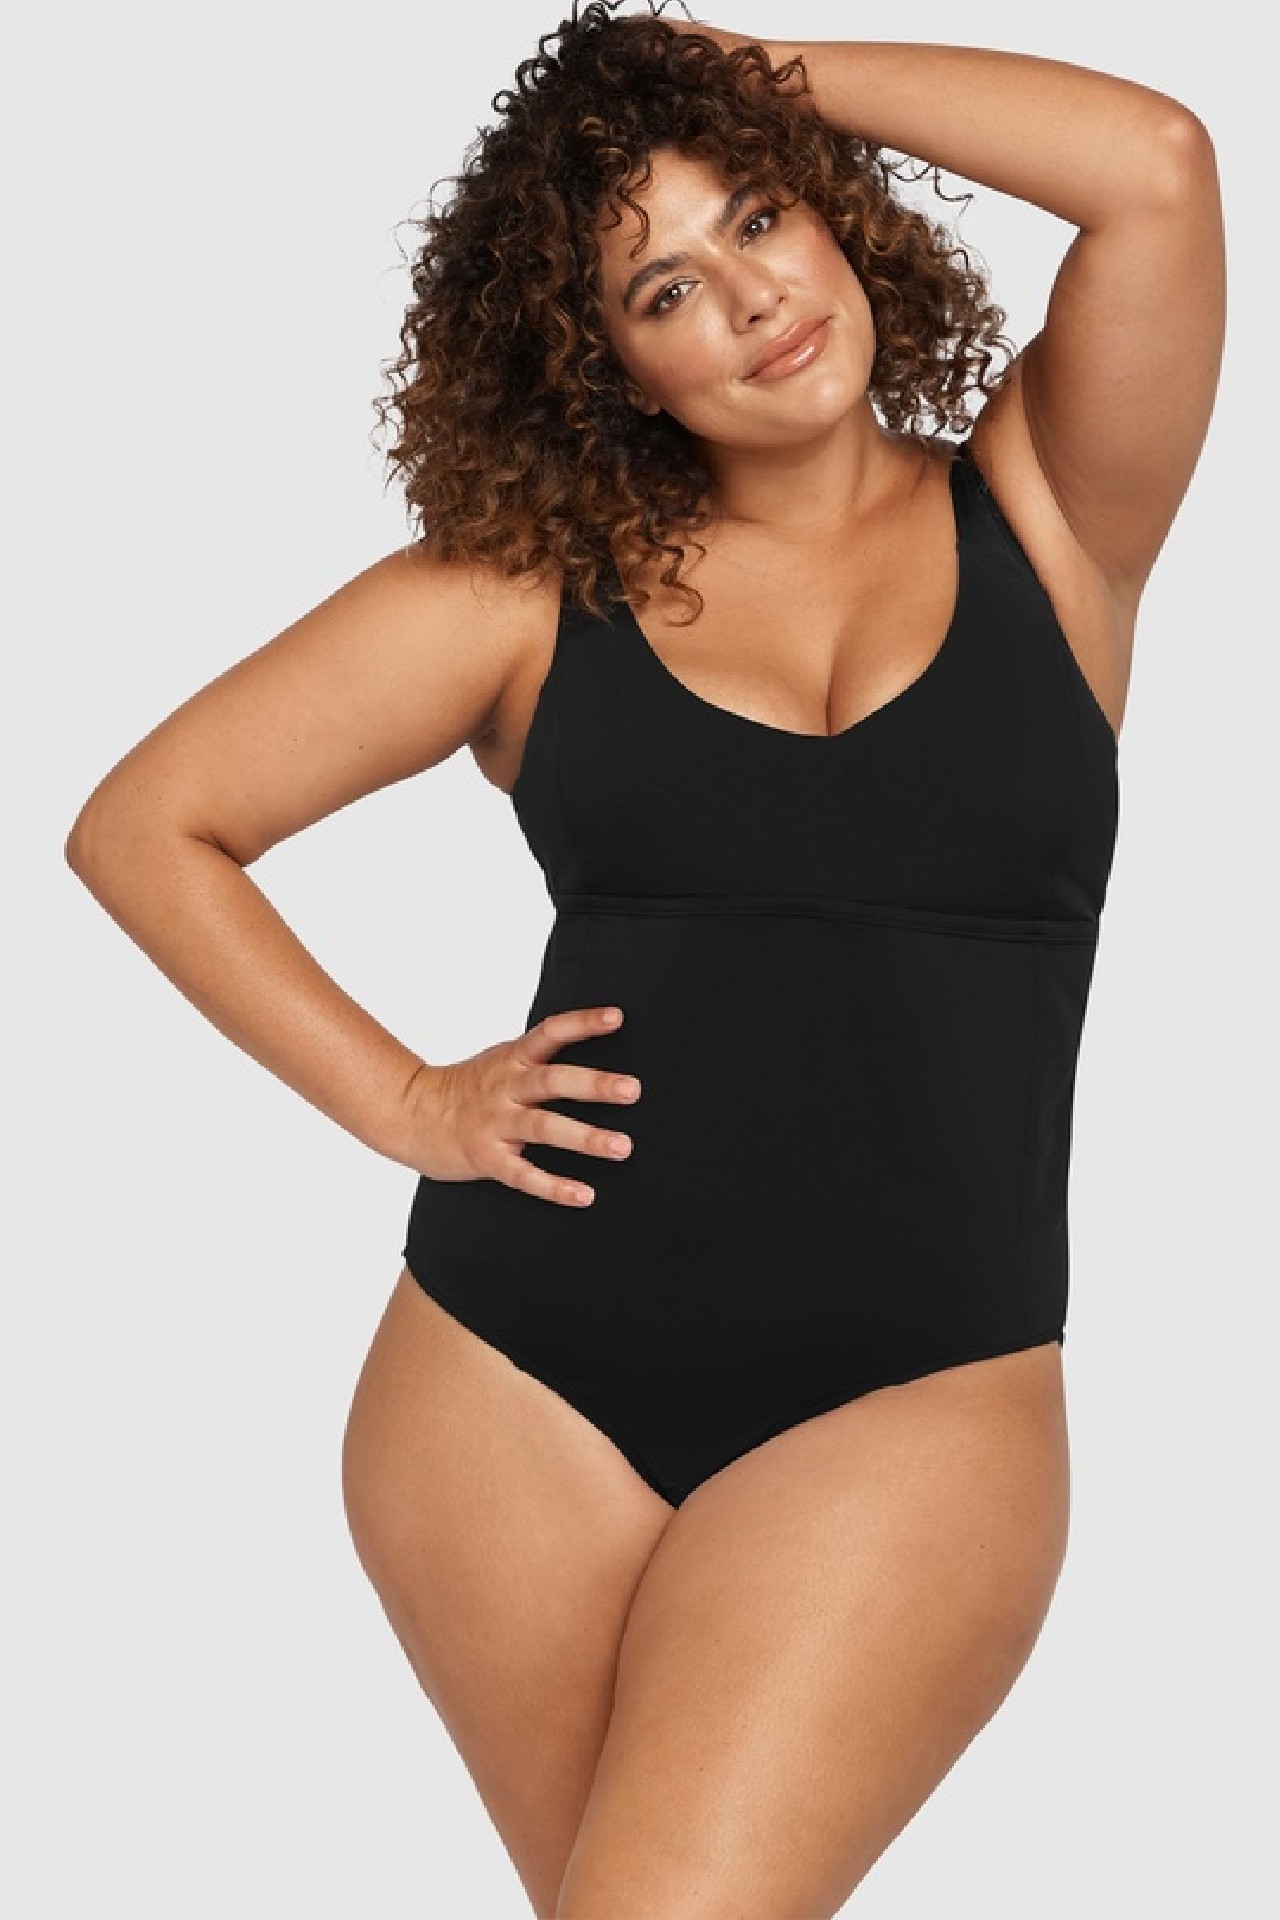 The Best One Piece Swimsuits For Women In Australia 2023 - Vogue